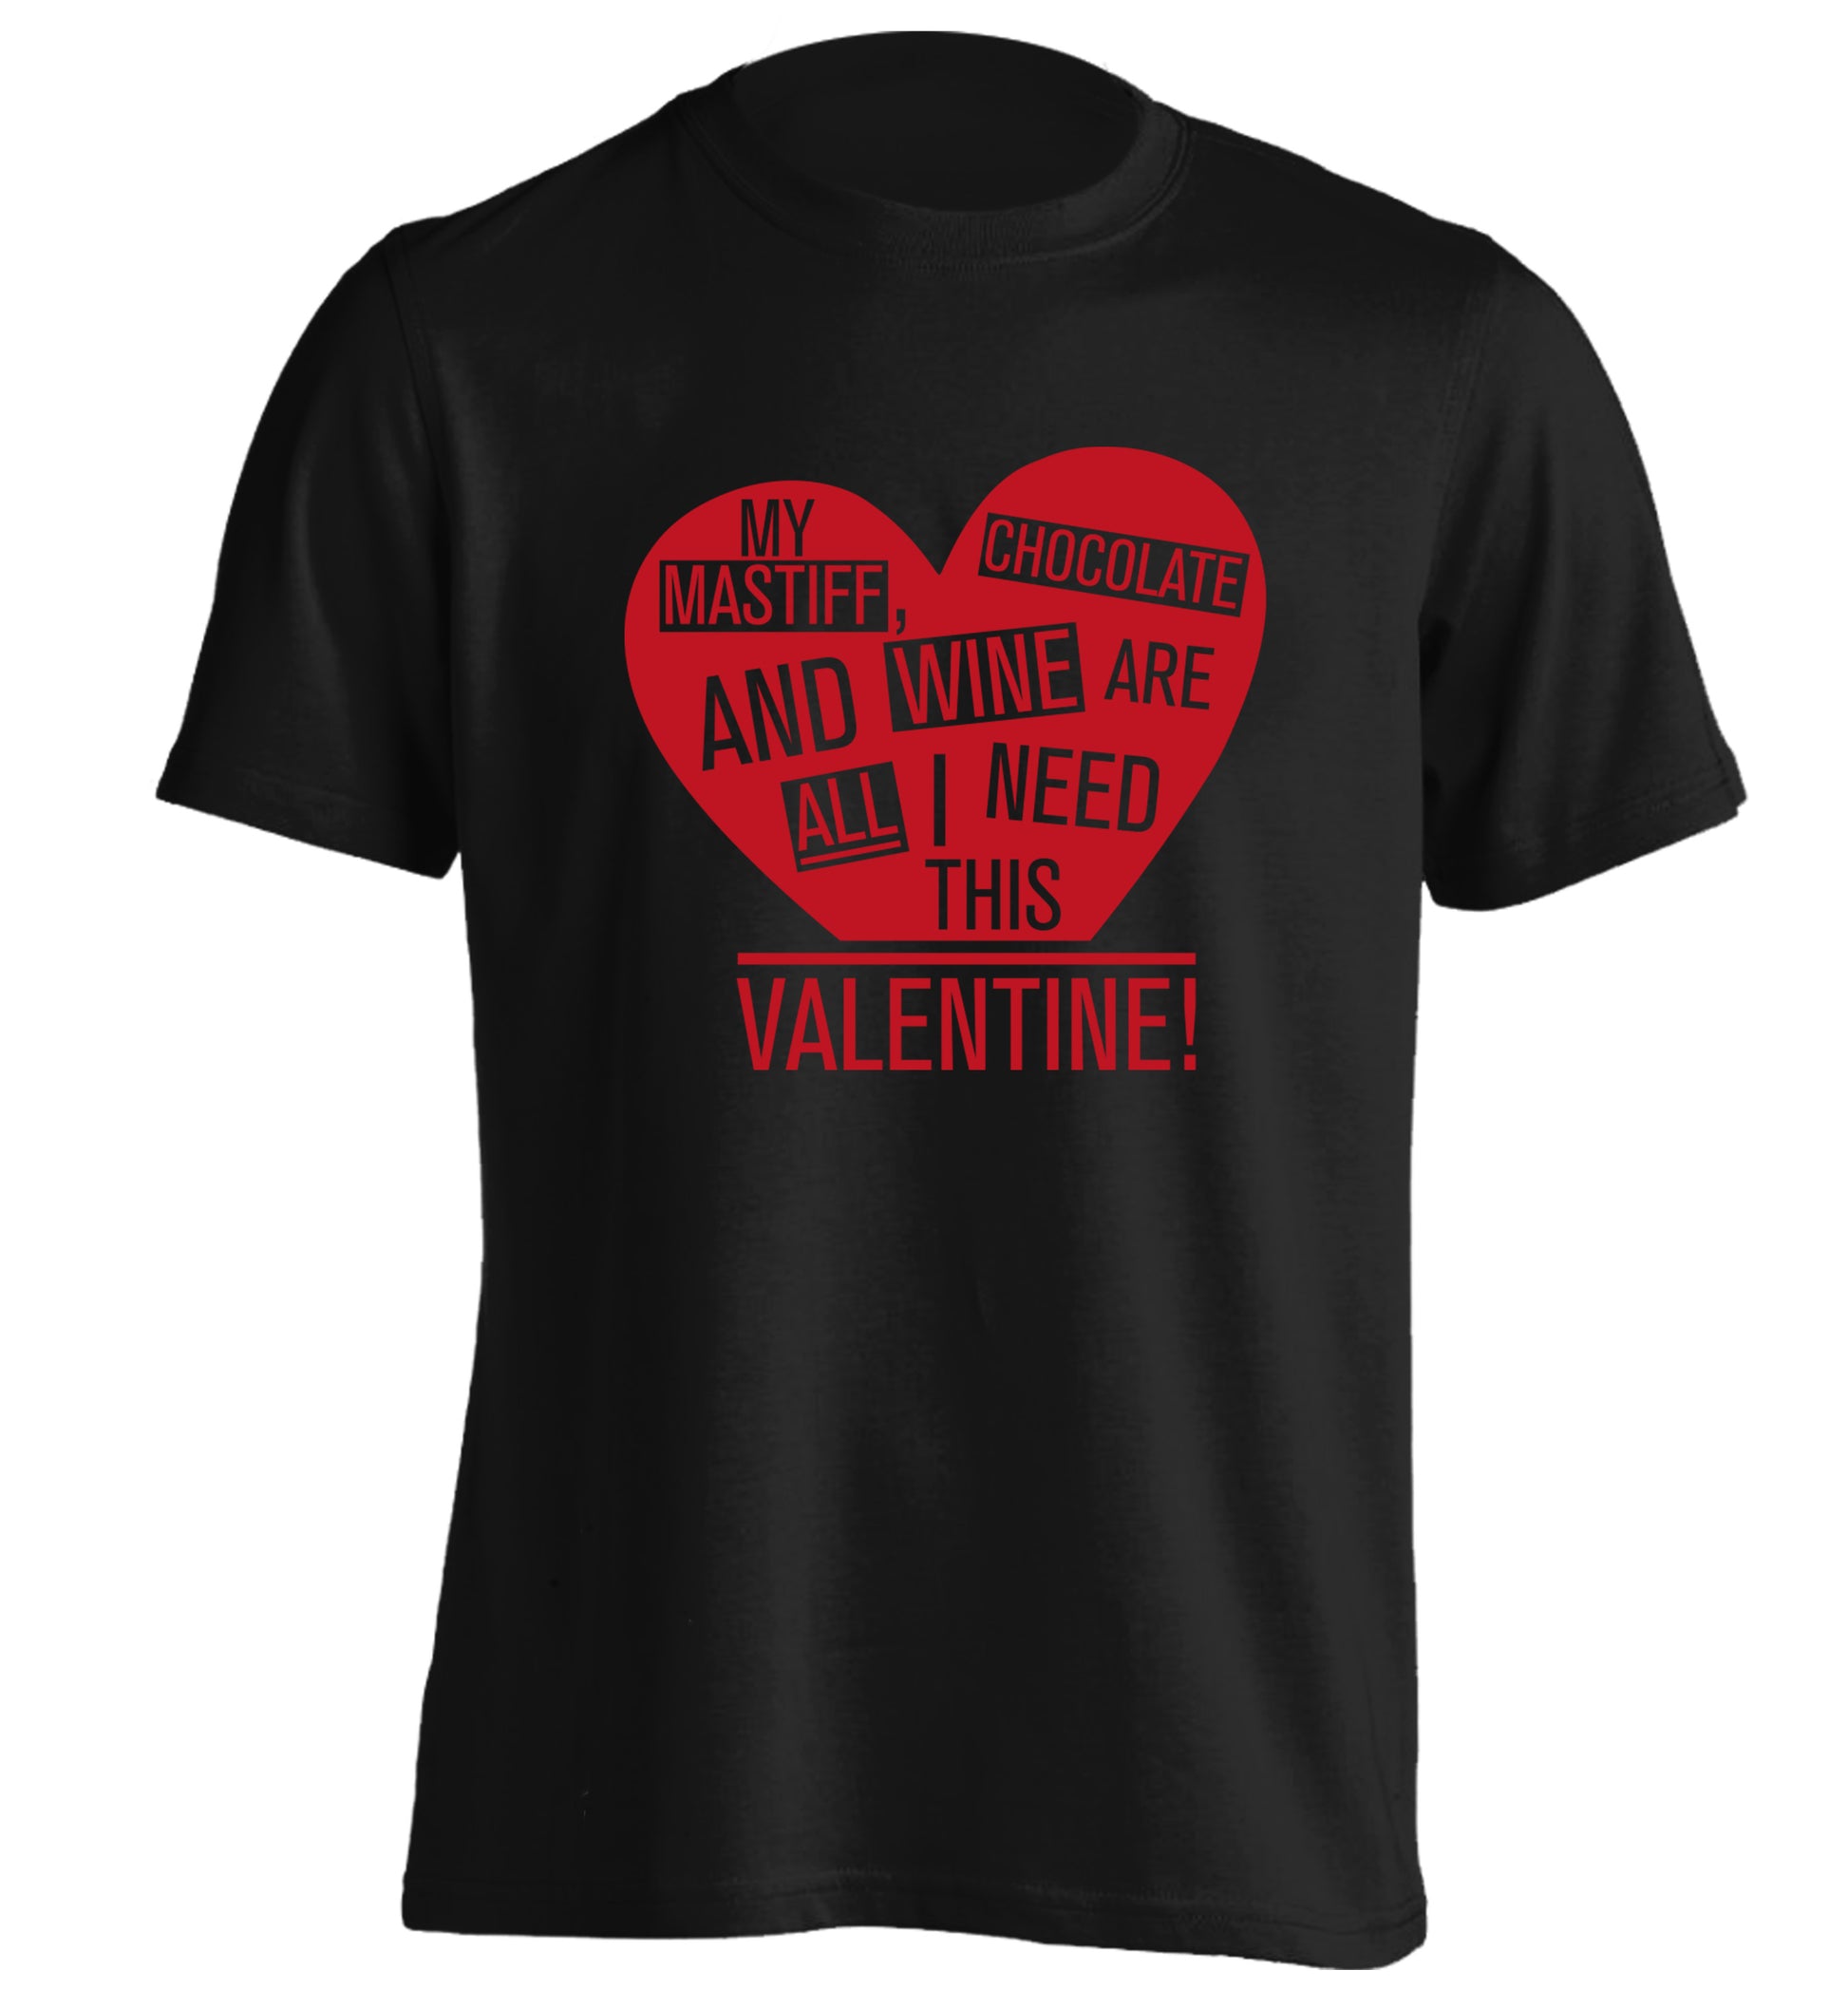 My mastiff, chocolate and wine are all I need this valentine! adults unisex black Tshirt 2XL